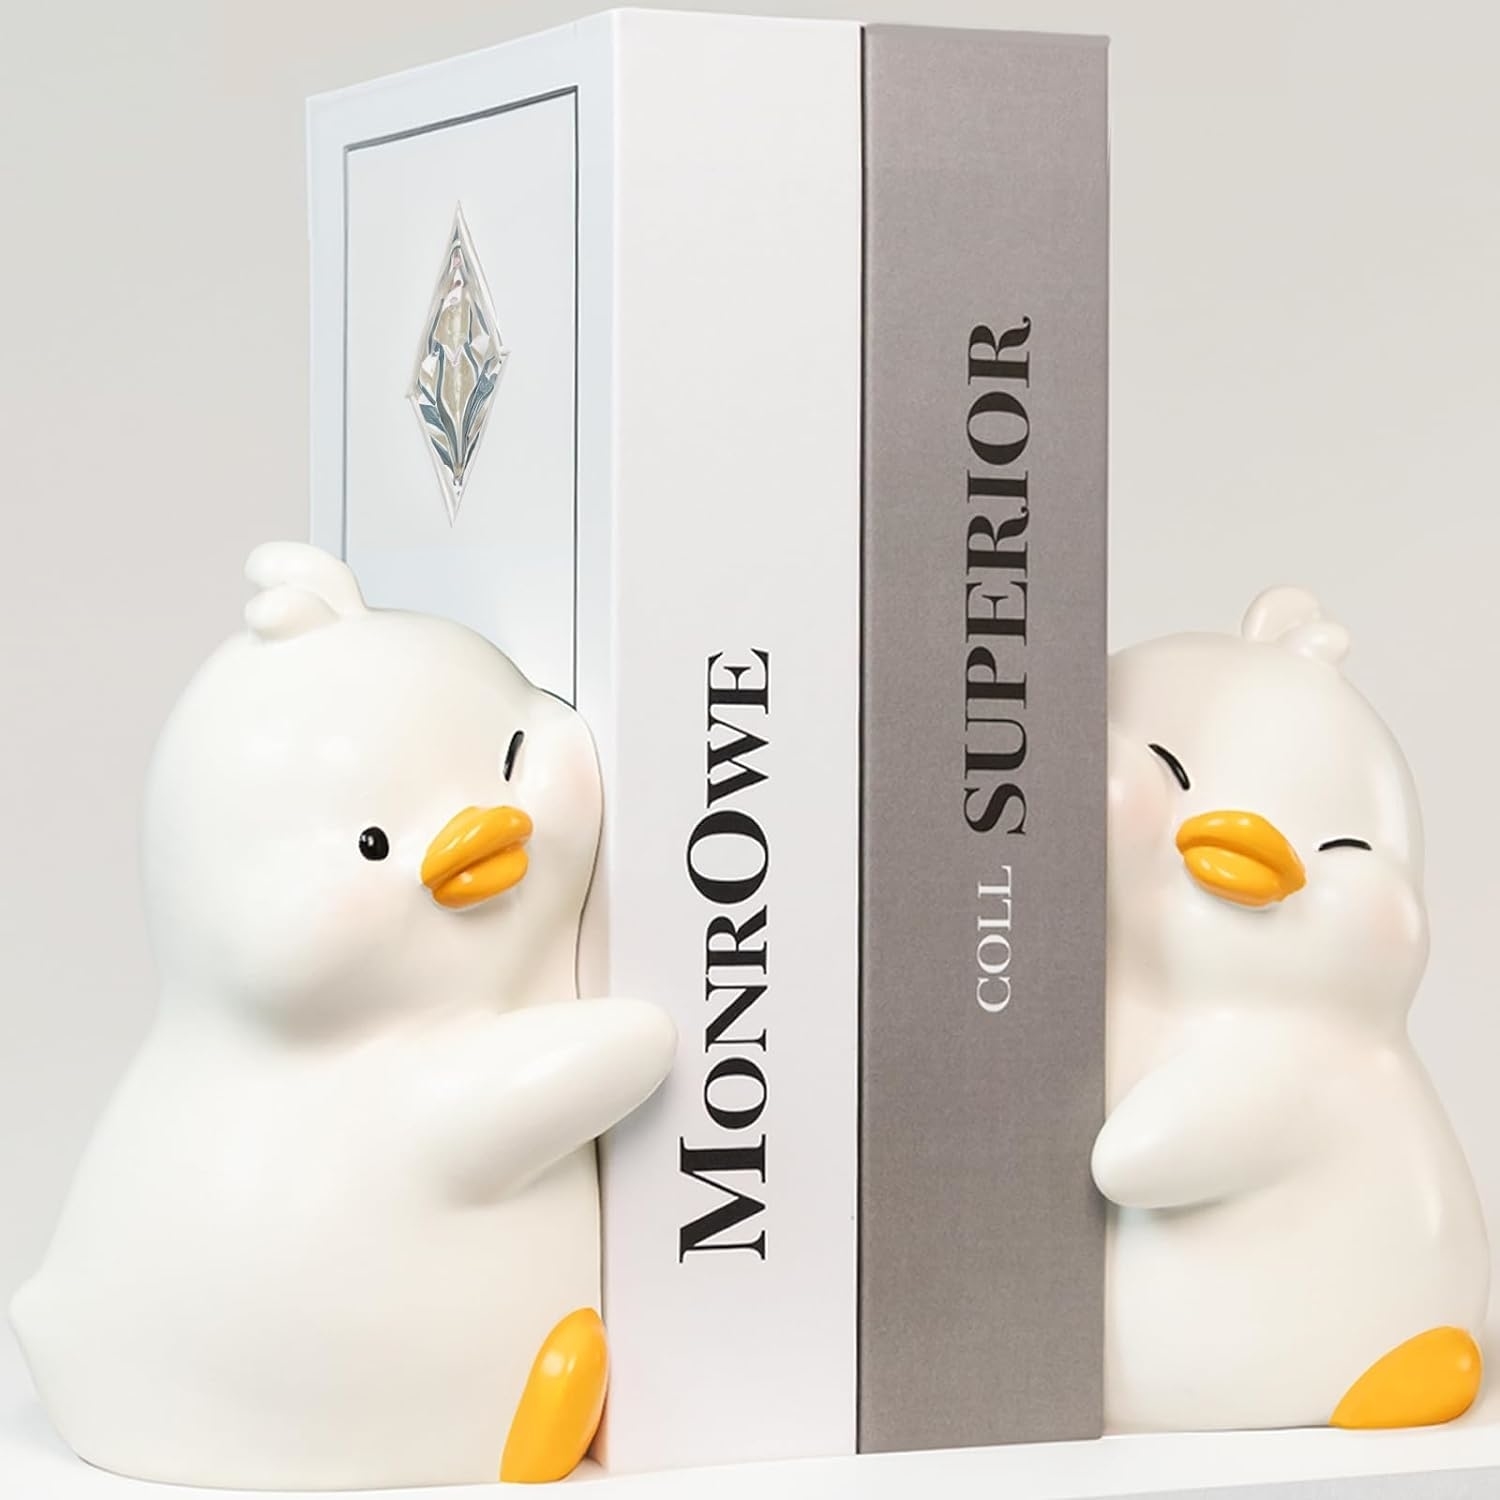 Two large duck book ends holding two books up